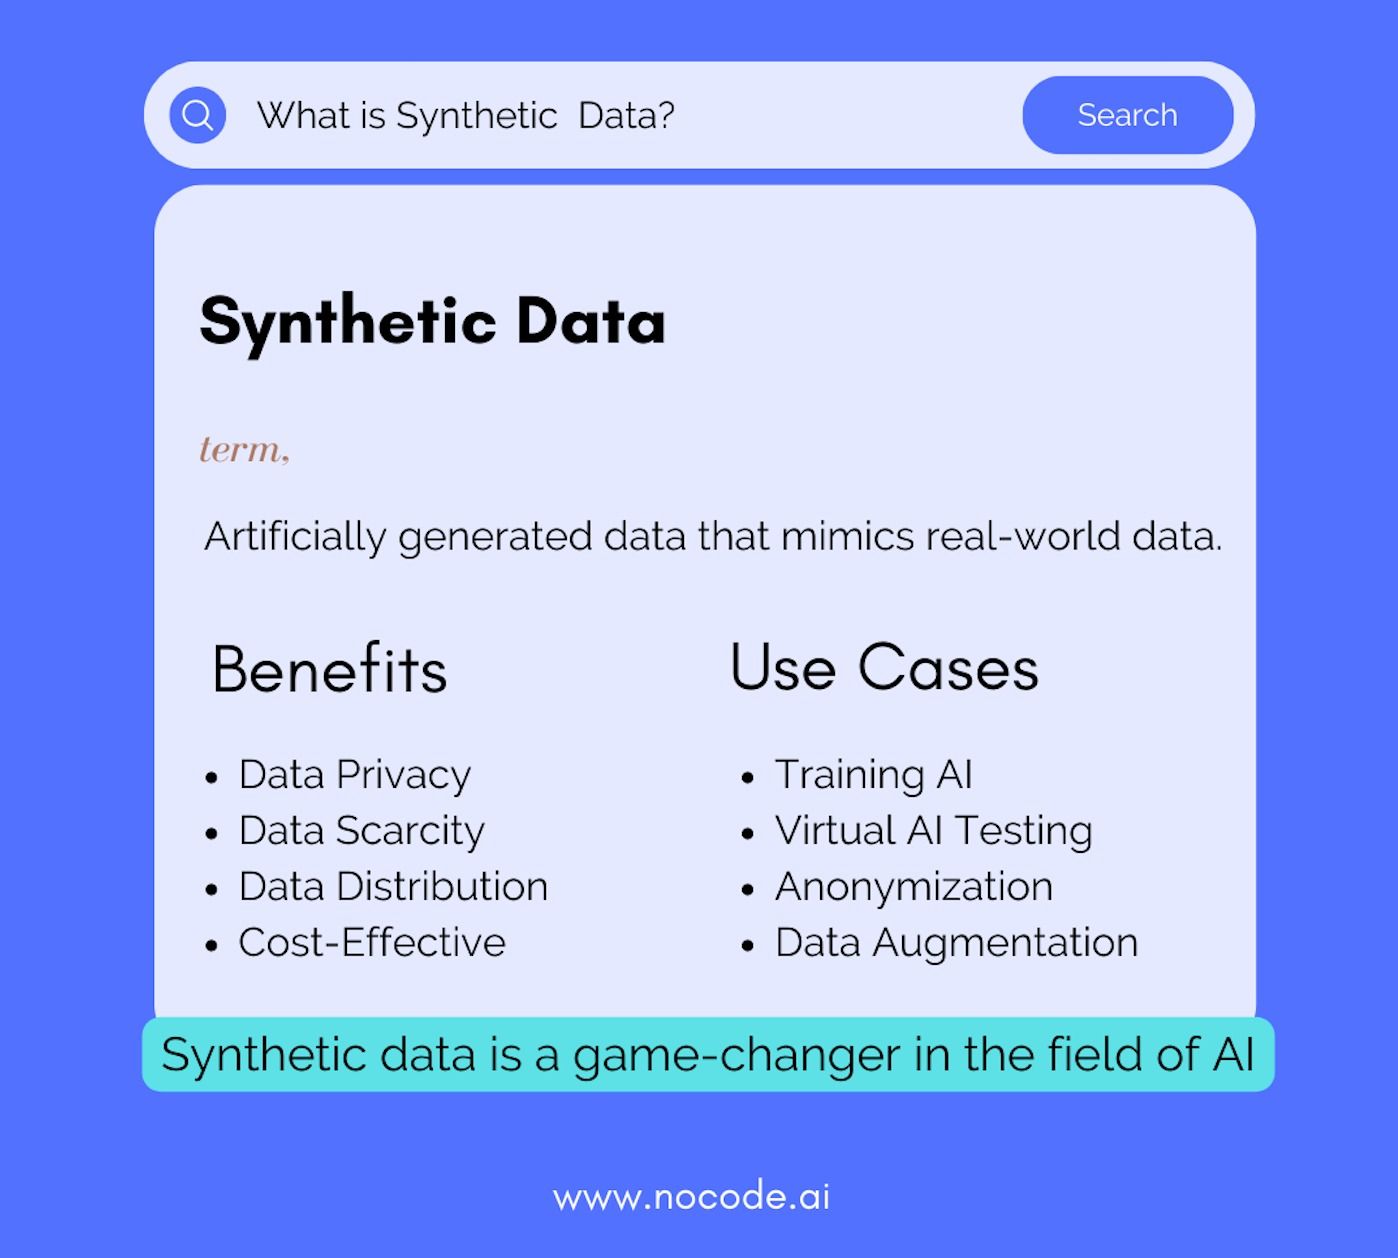 What is Synthetic Data and what are the Benefits of using it for AI?